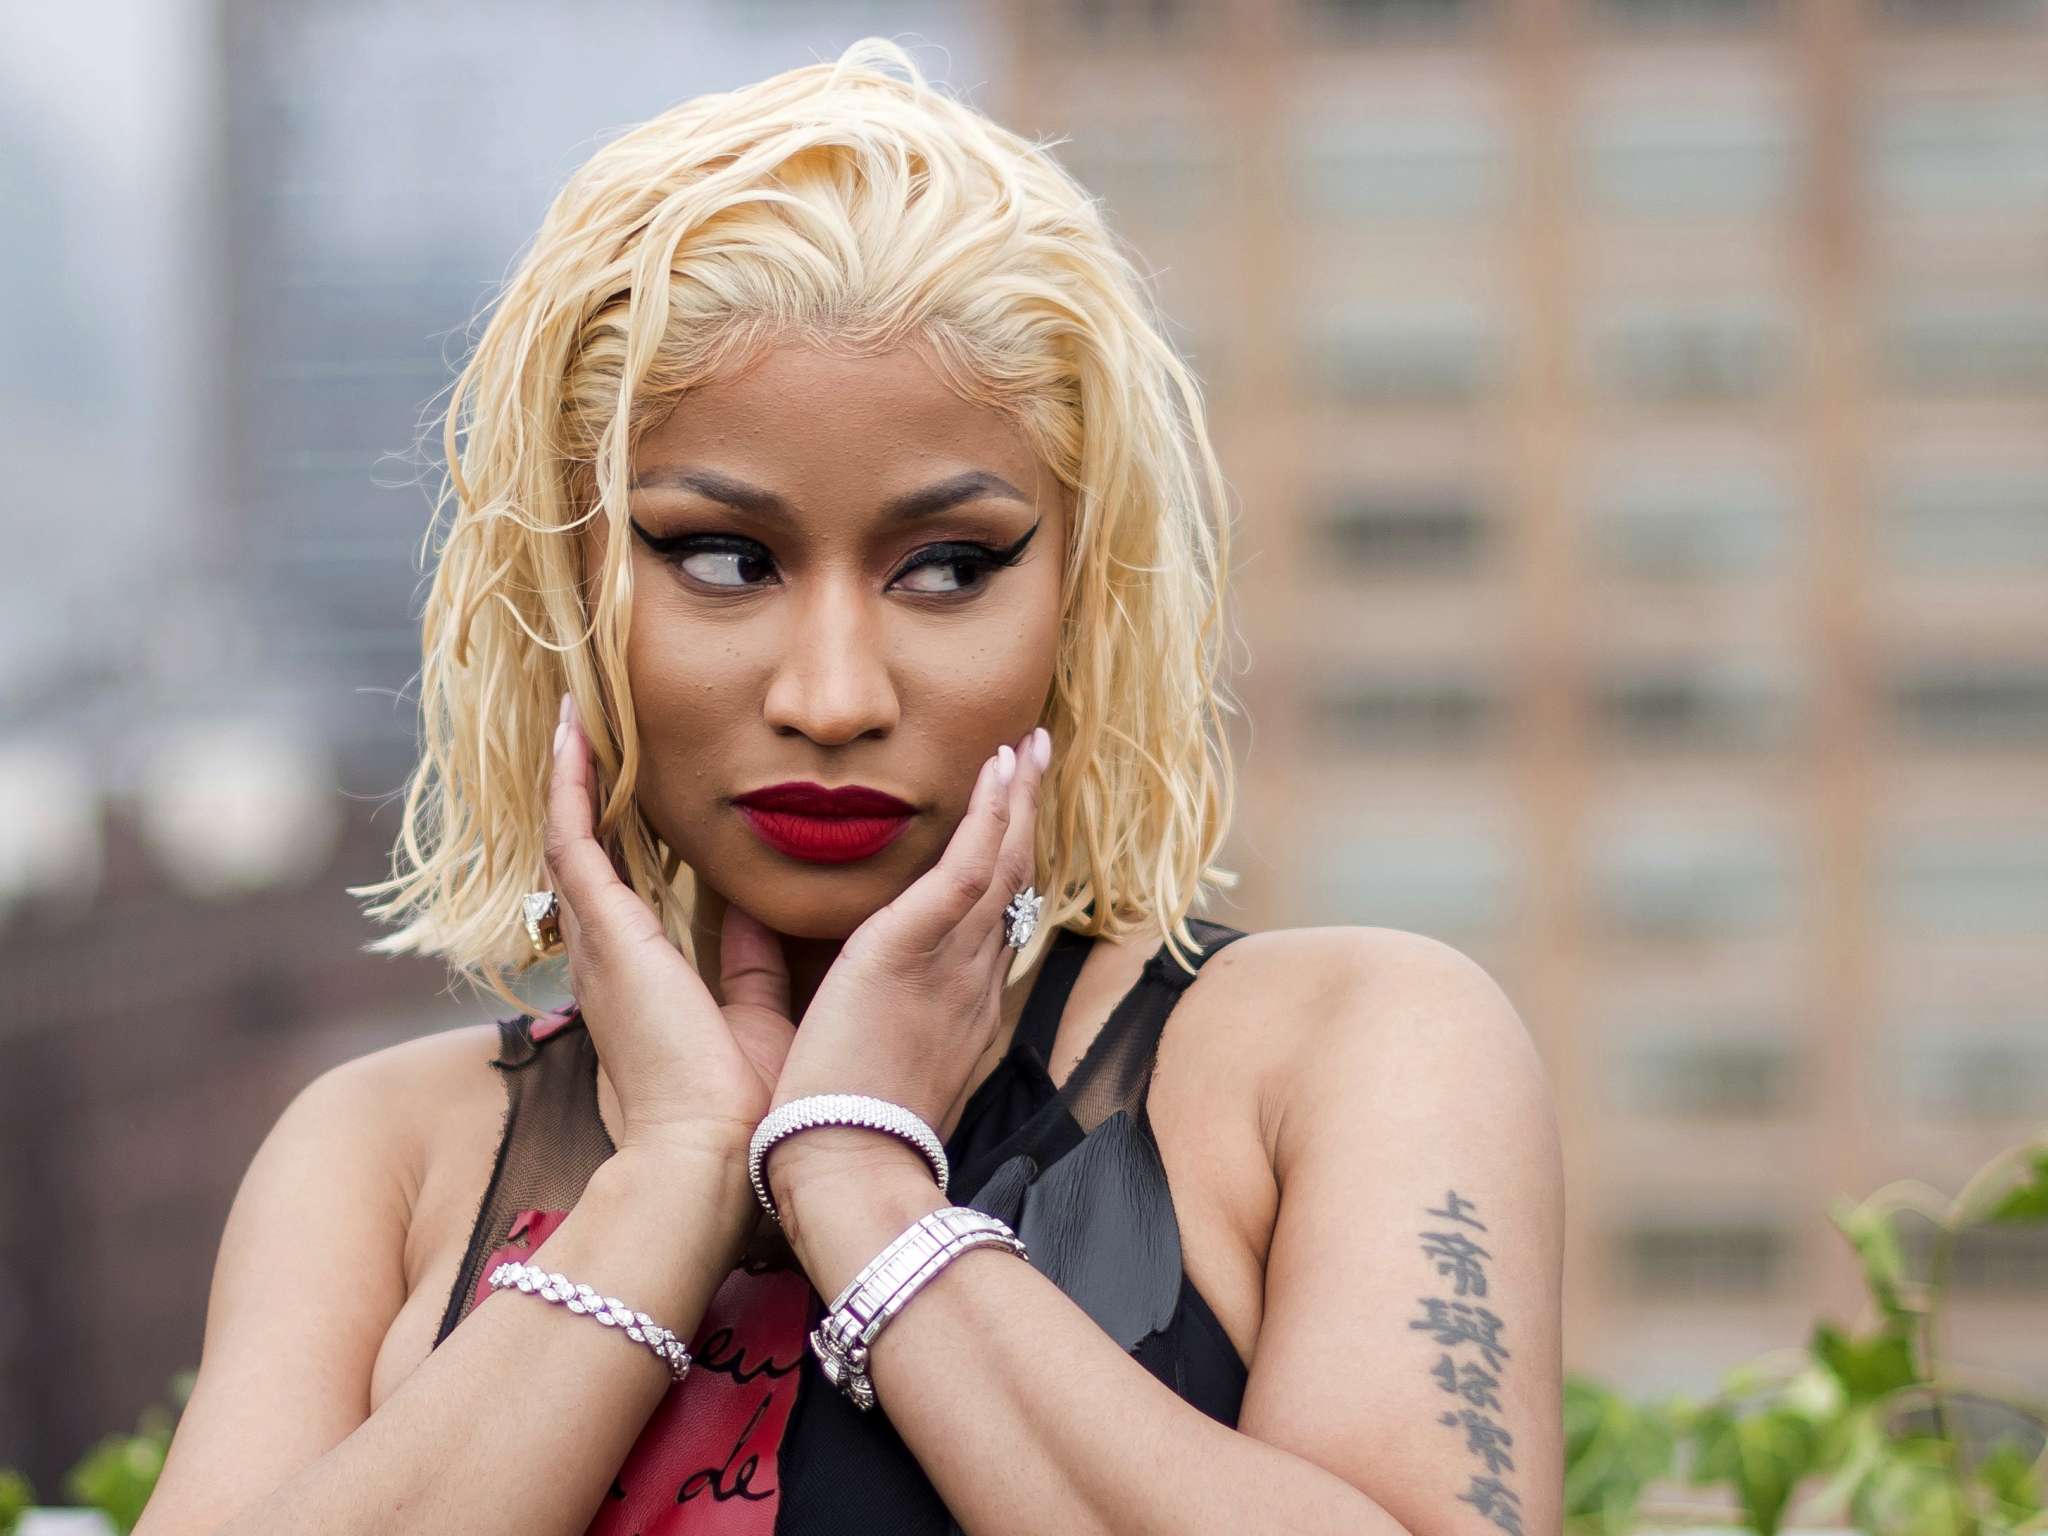 nicki-minajs-fans-are-going-crazy-with-excitement-following-the-latest-announcement